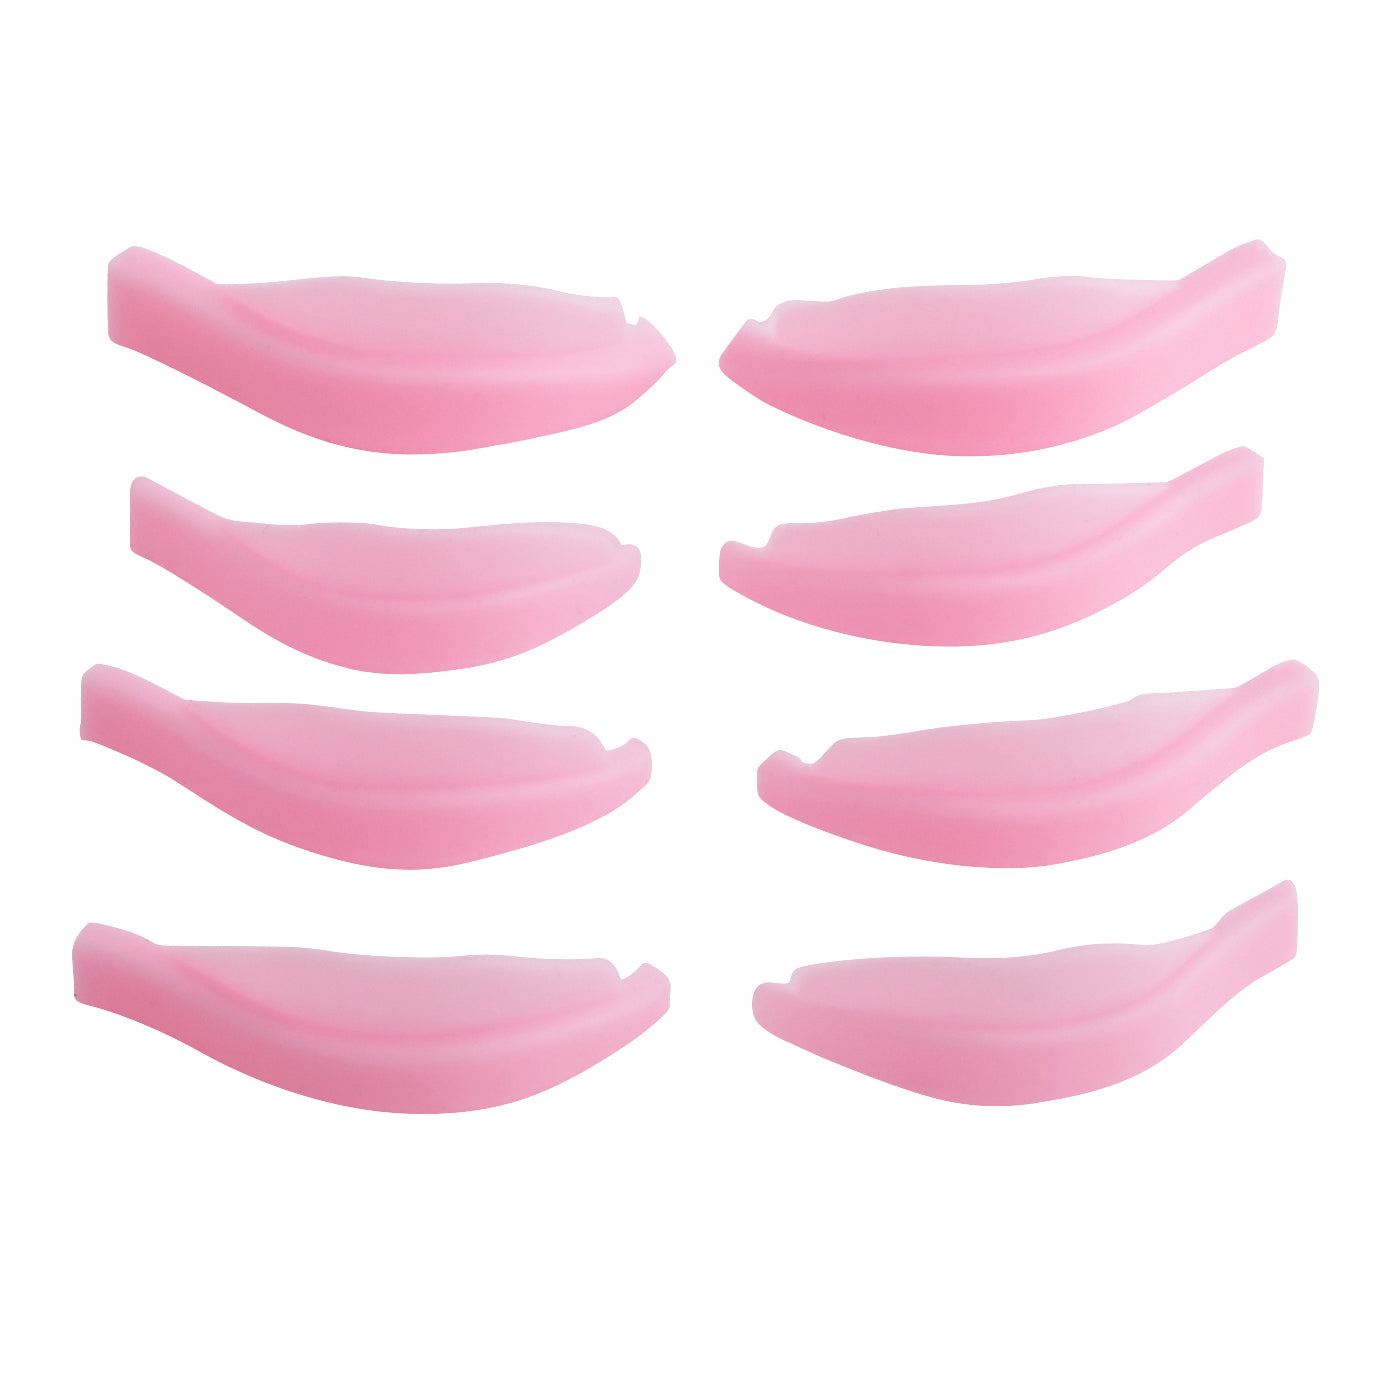 Silikon Pads by Ana Ceni Mix Box in Pink Glitzer für das Wimpernlifting –  EasyLift Pro